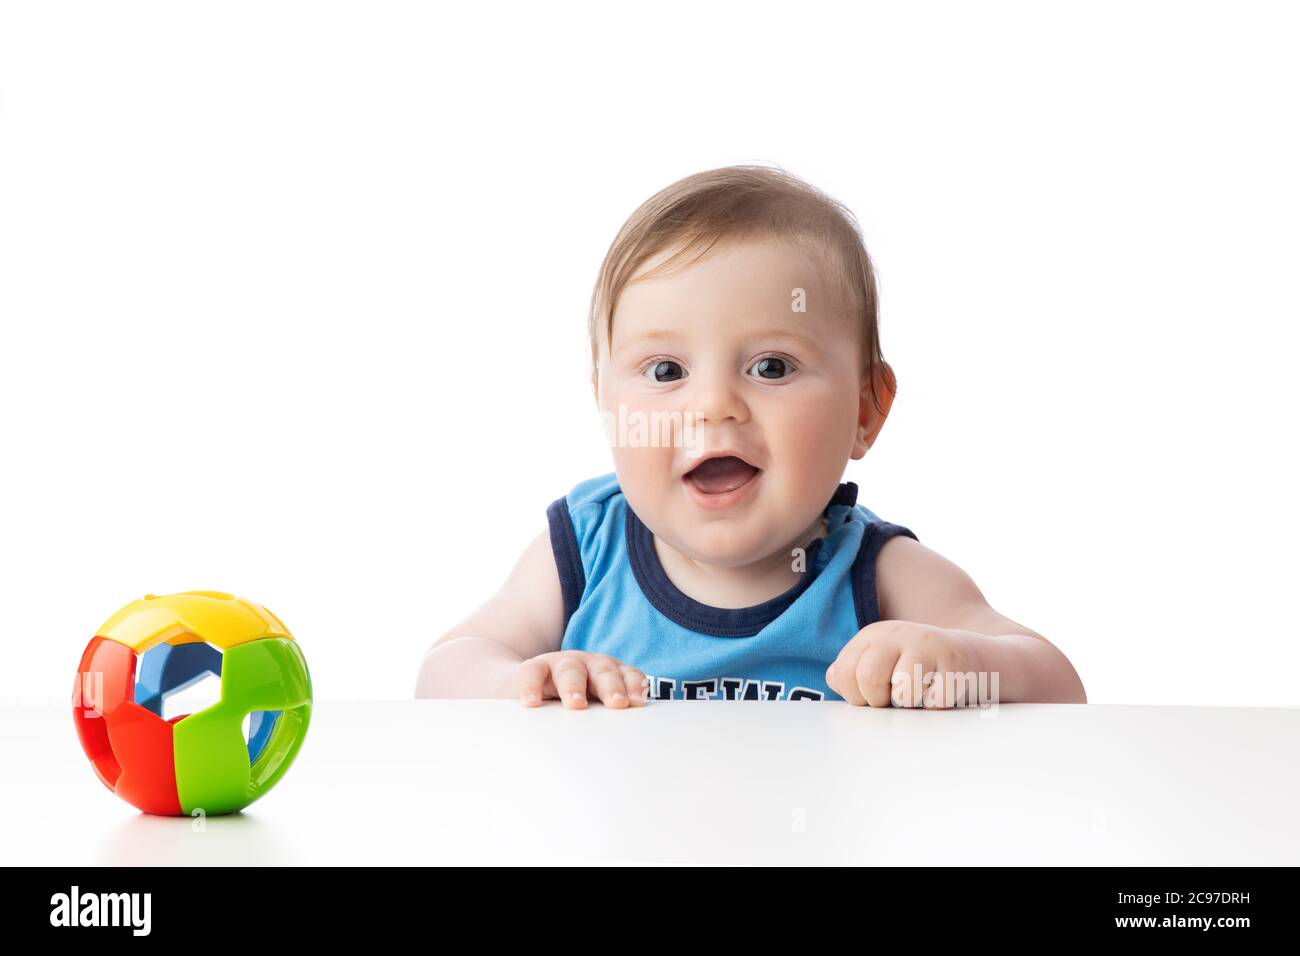 Cute baby boy looking surprised. 5 months baby ready to play games with toys. Stock Photo